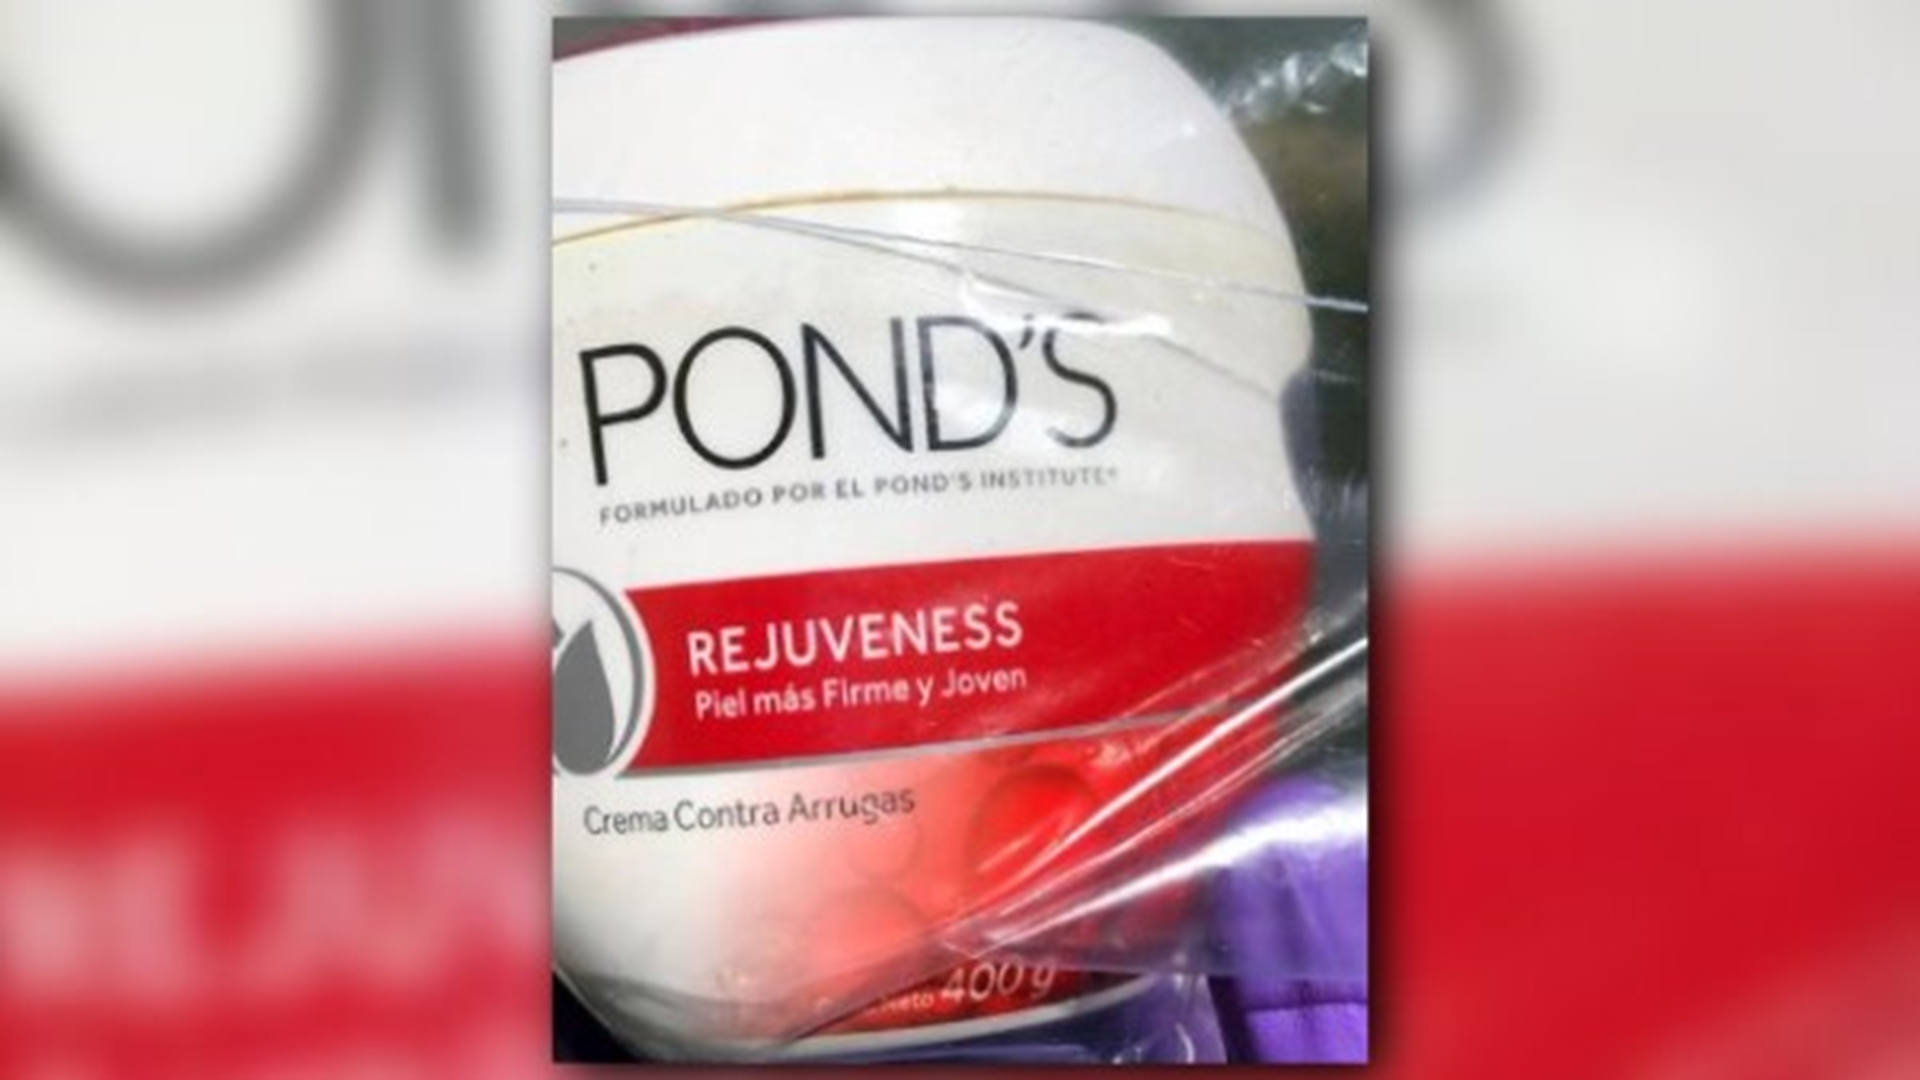 A Sacramento woman is in a semi-comatose state after using a Pond's cream that was tainted with methylmercury. The cream was purchased from Mexico, but it is unclear where the mercury was added.